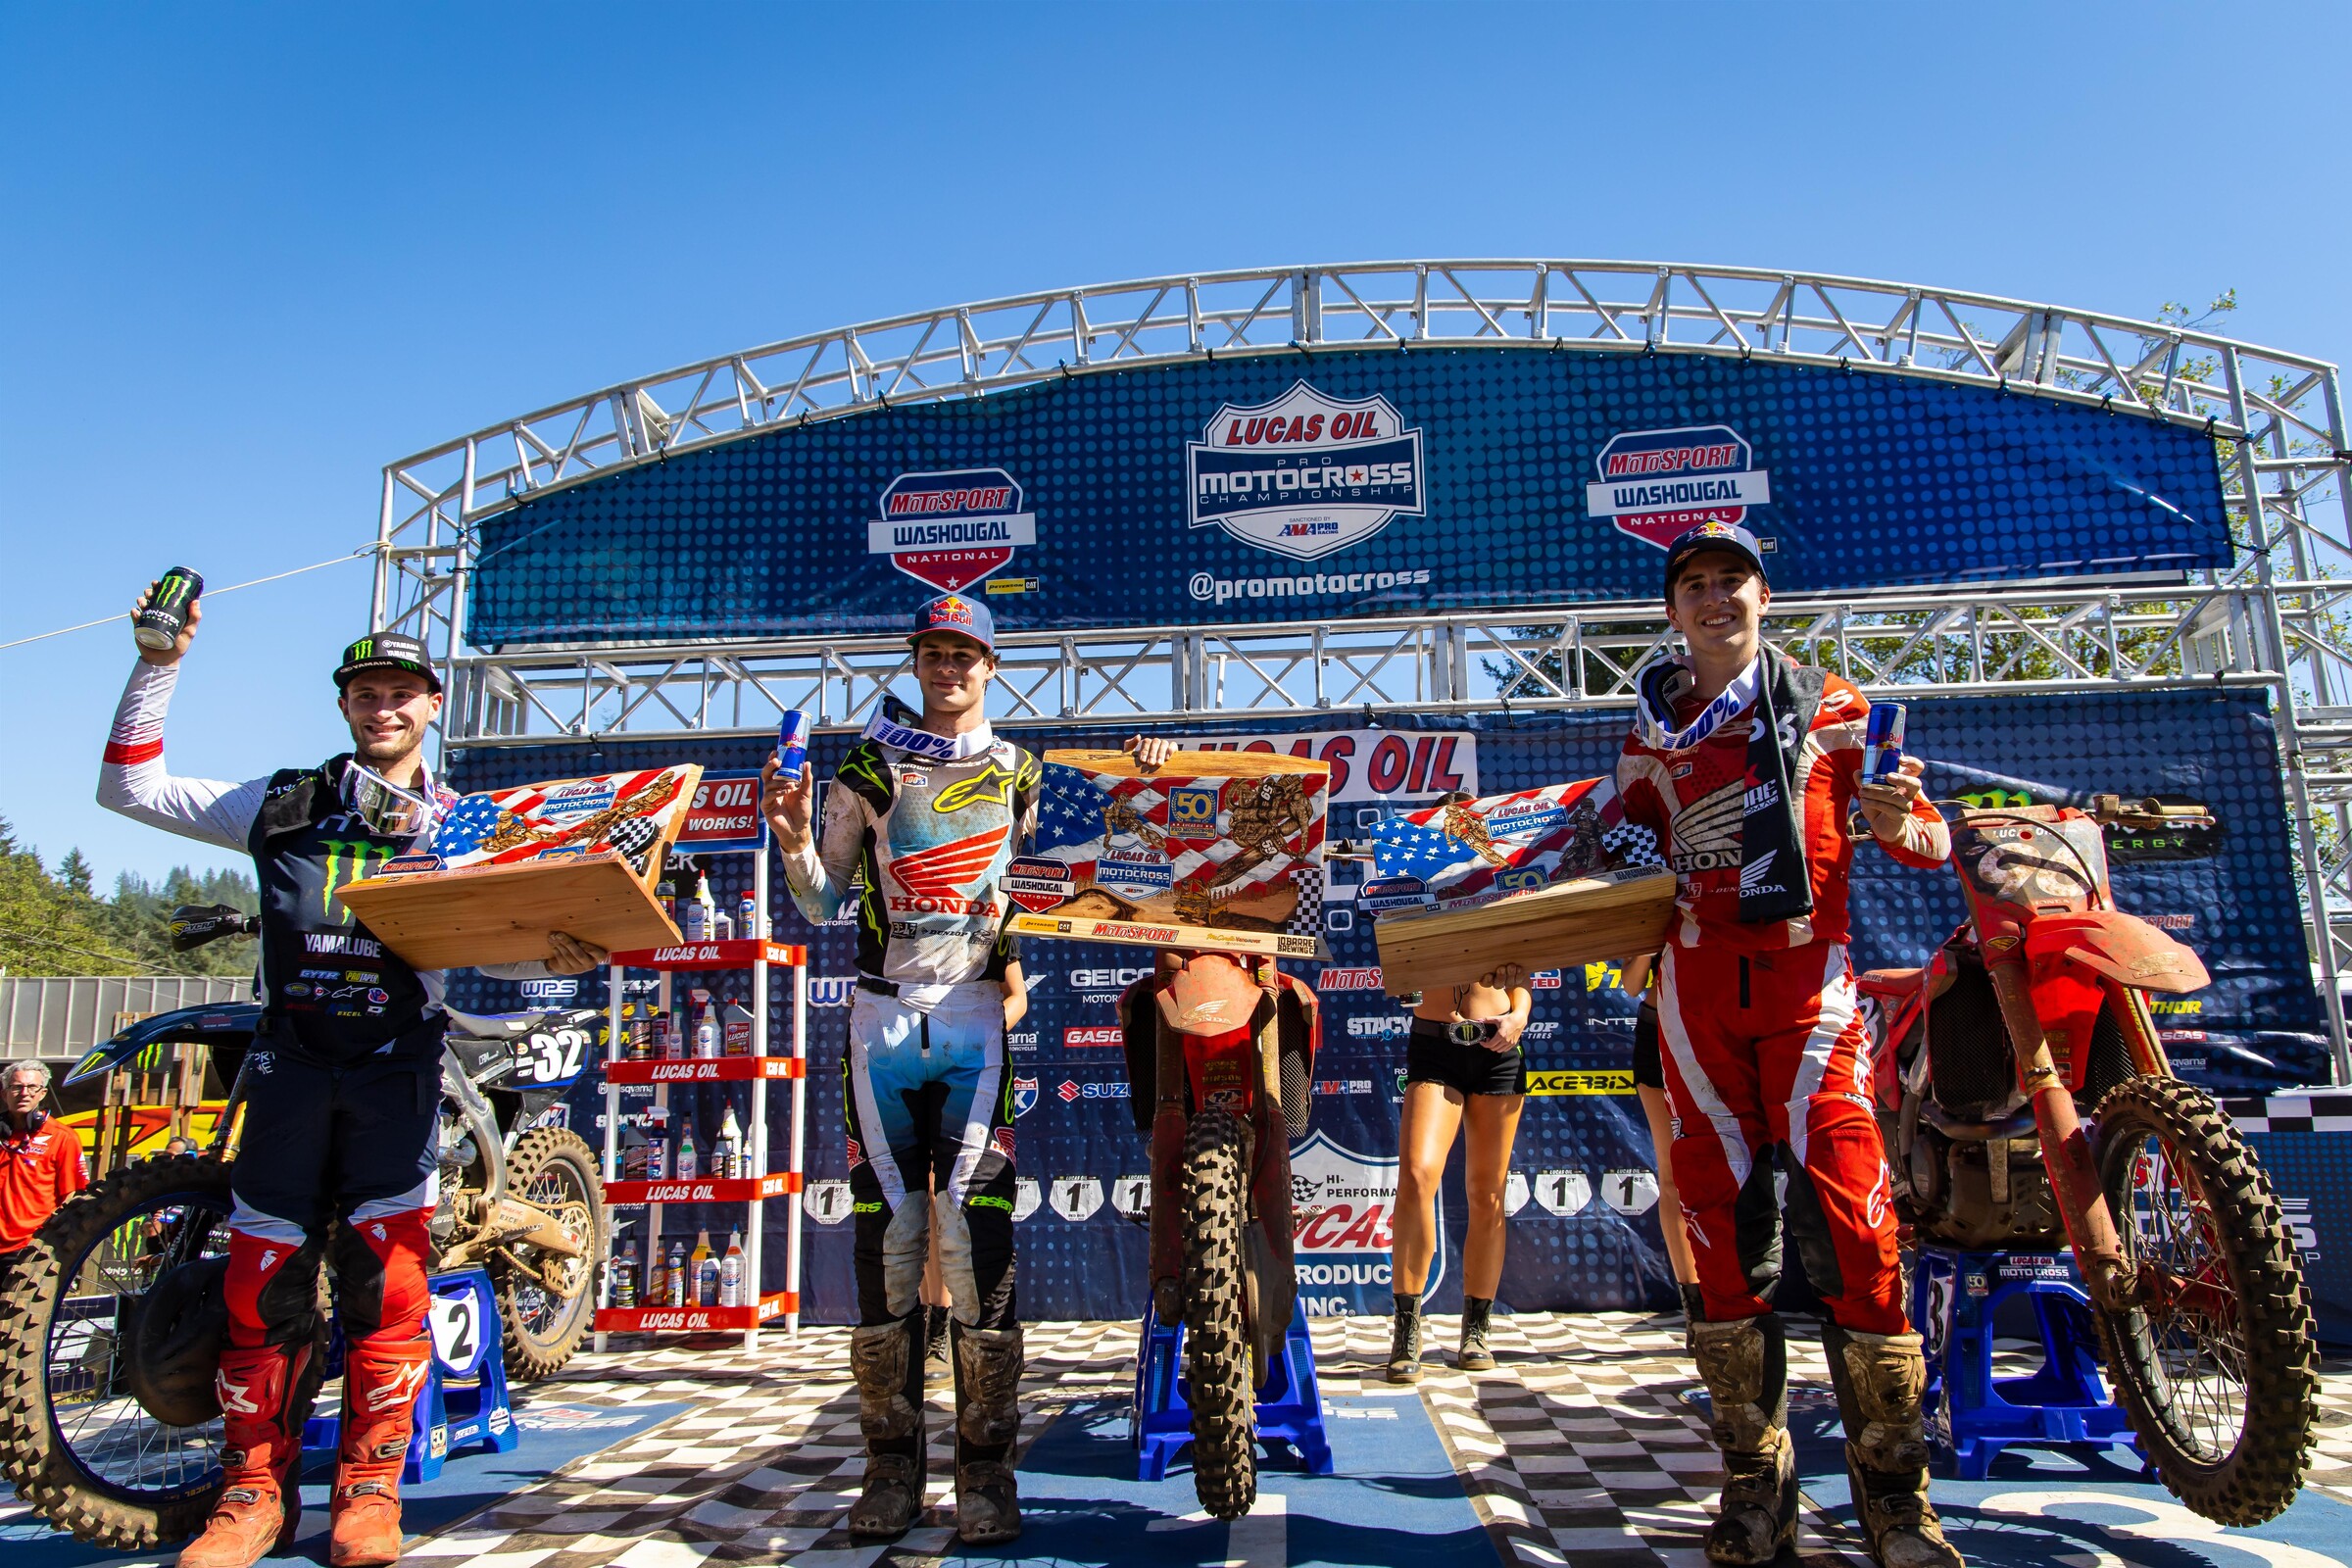 Washougal National, MXGP of Flanders, Riverglade Results & Standings